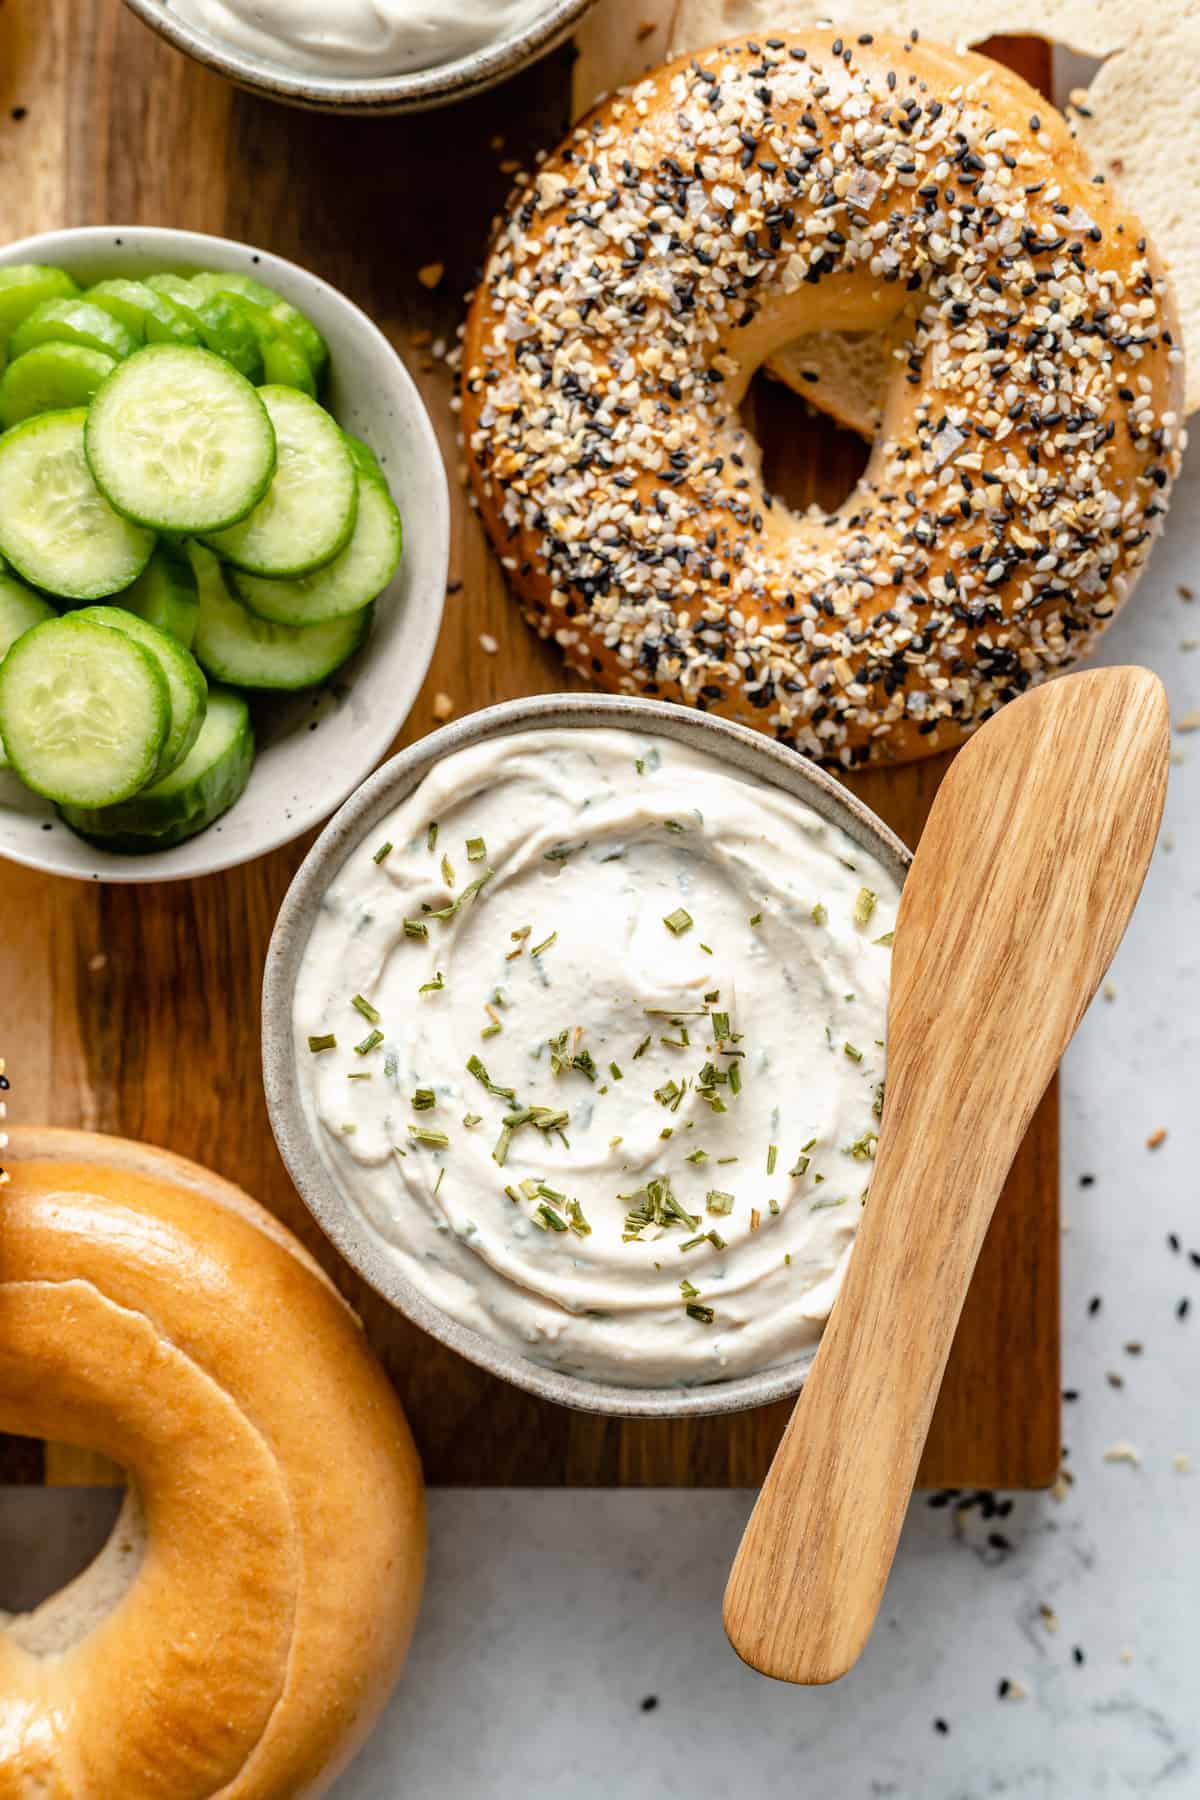 Cream cheese with chives and garlic.